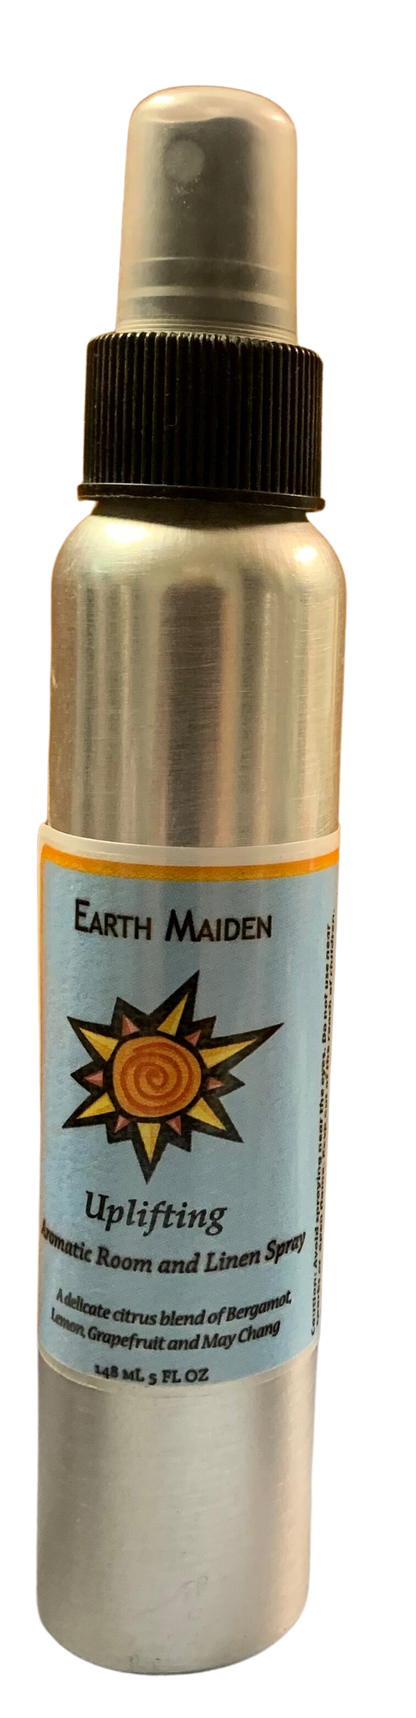 All Natural Uplifting Aroma Mist with Essential Oils of Bergamot, Grapefruit and May Chang  in 5 ounce metal bullet container with fine mist sprayer.